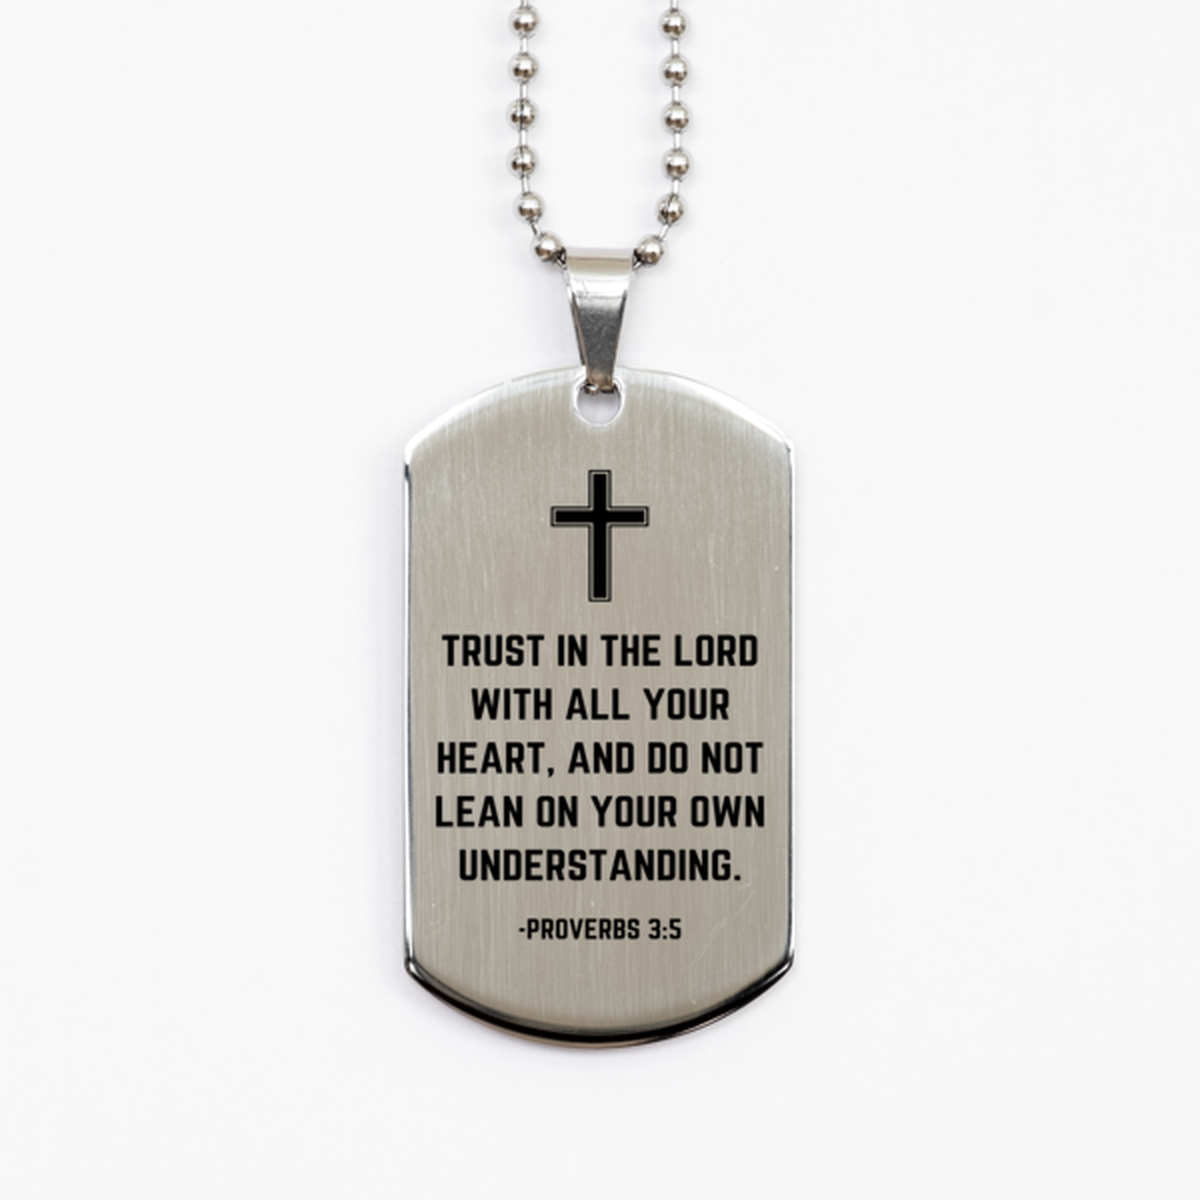 Baptism Gifts For Teenage Boys Girls, Christian Bible Verse Silver Dog Tag, Trust in the Lord with all your heart, Confirmation Gifts, Bible Verse Necklace for Son, Godson, Grandson, Nephew